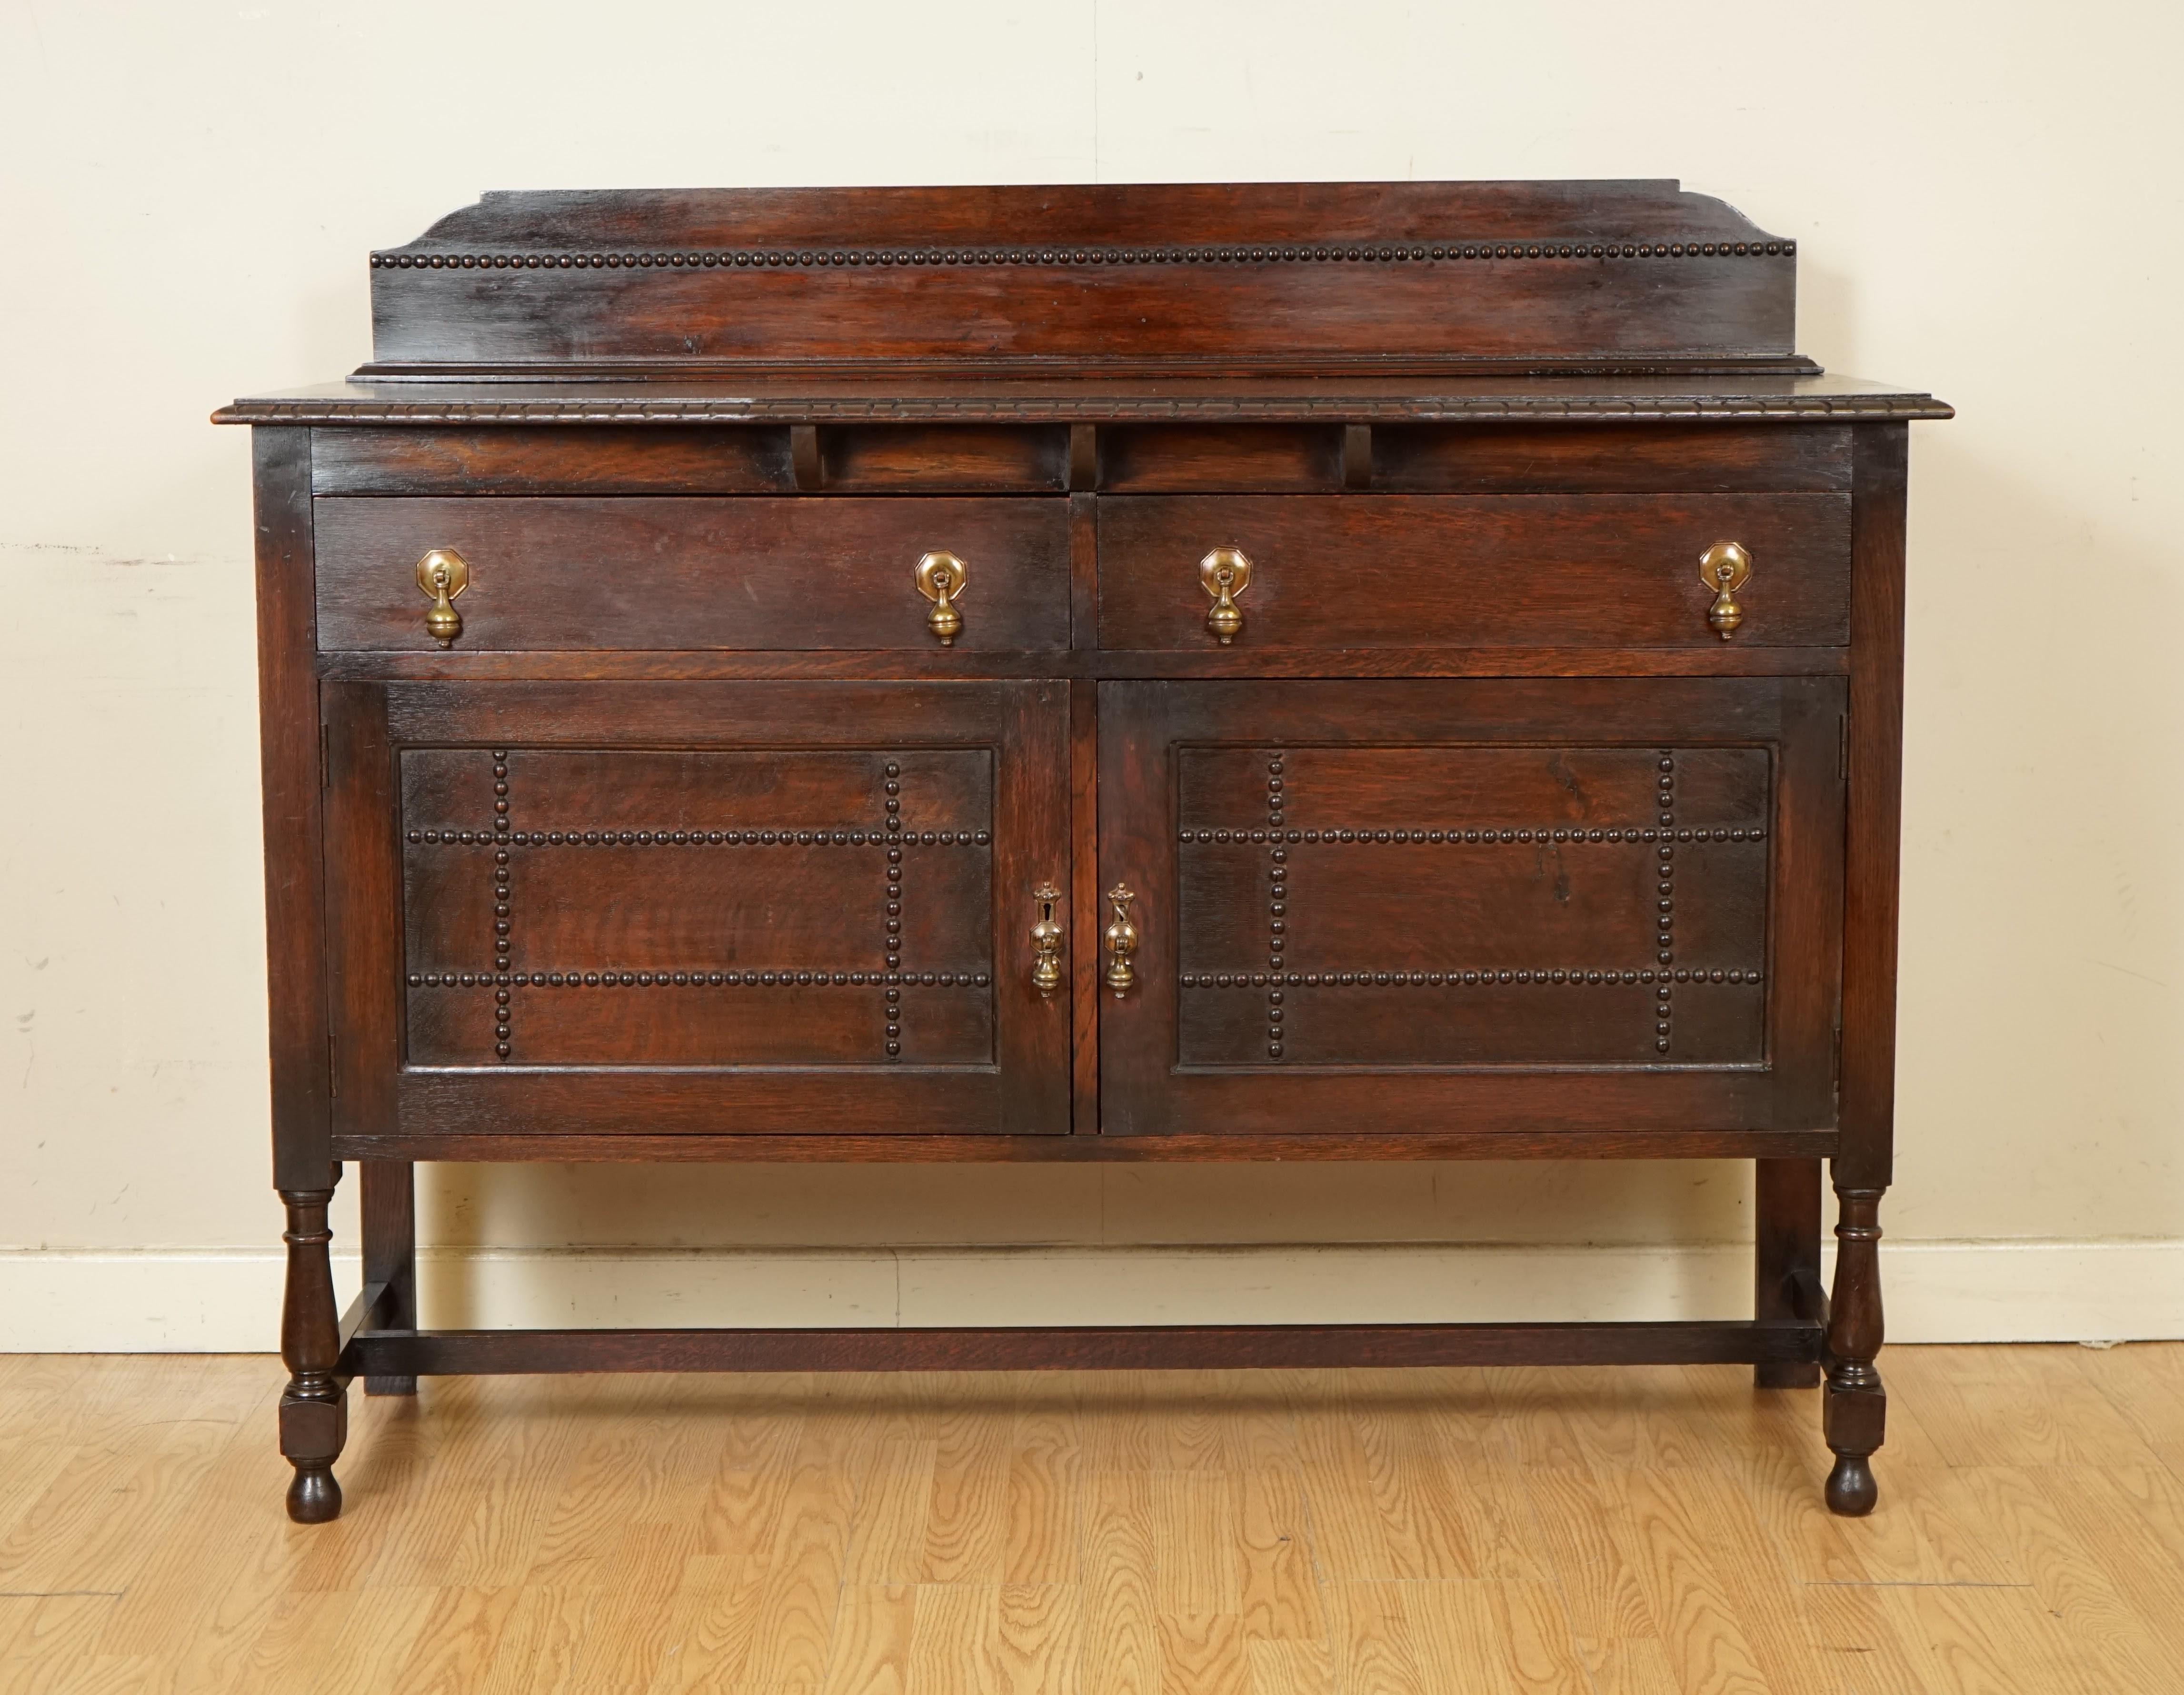 Hand-Crafted Lovely Antique Oak Victorian Sideboard with Drawers and Doors